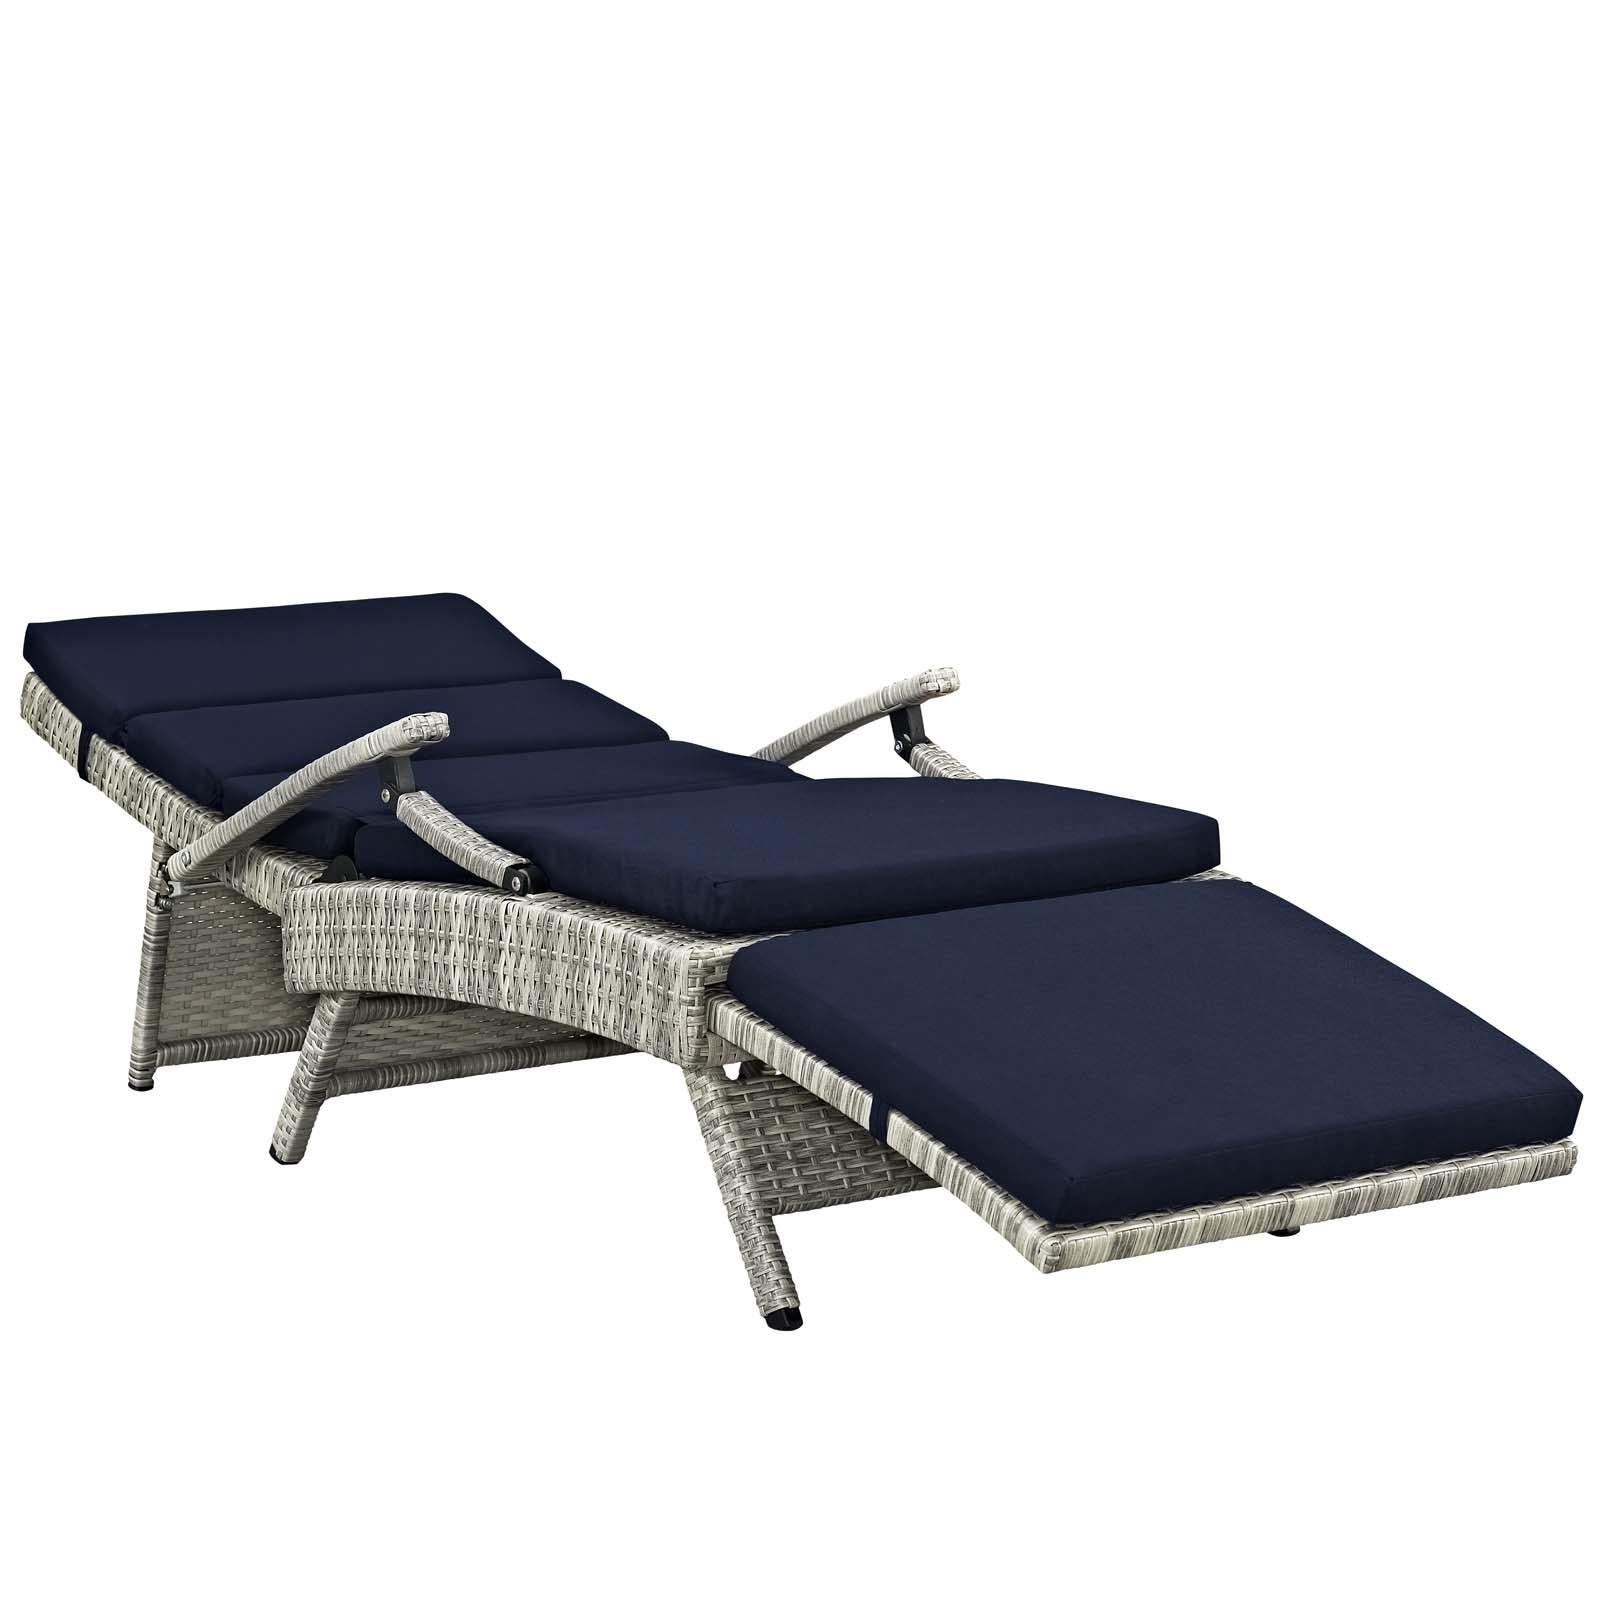 Modway Furniture Modern Envisage Chaise Outdoor Patio Wicker Rattan Lounge Chair - EEI-2301